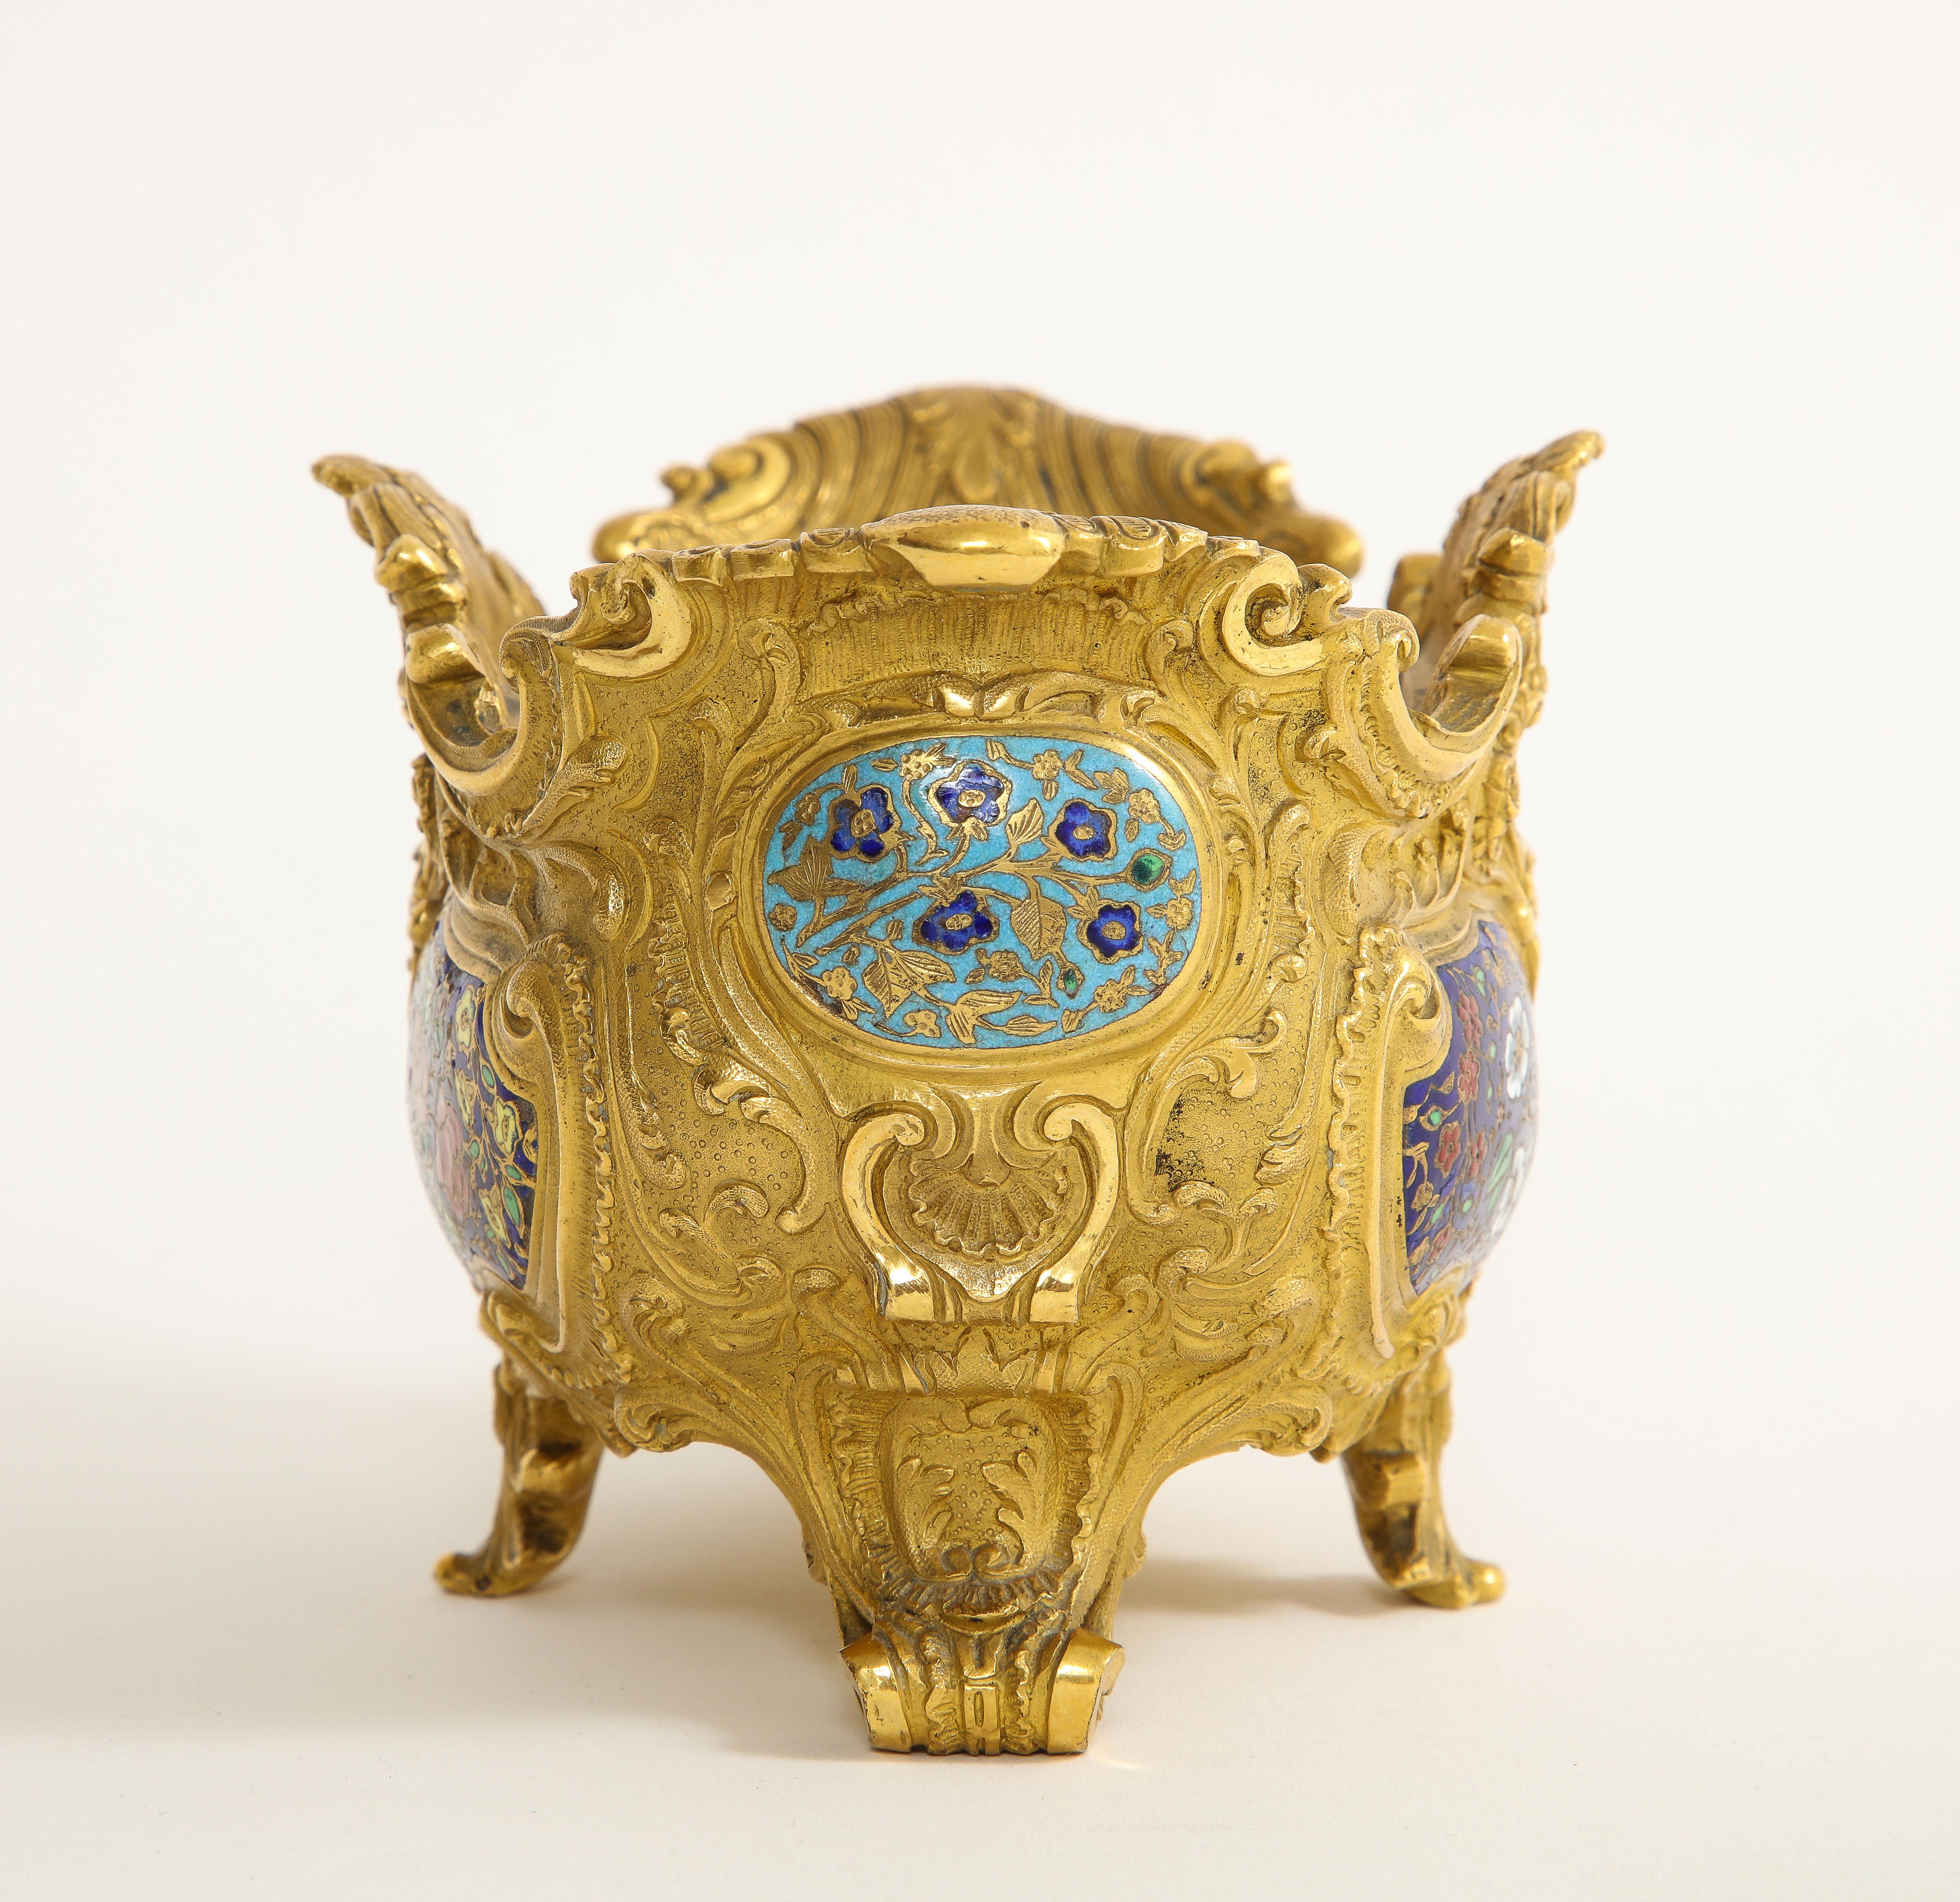 Hand-Crafted A 19th C. French Ormolu Champlevé Enamel Footed Centerpiece, Att. Barbedienne For Sale